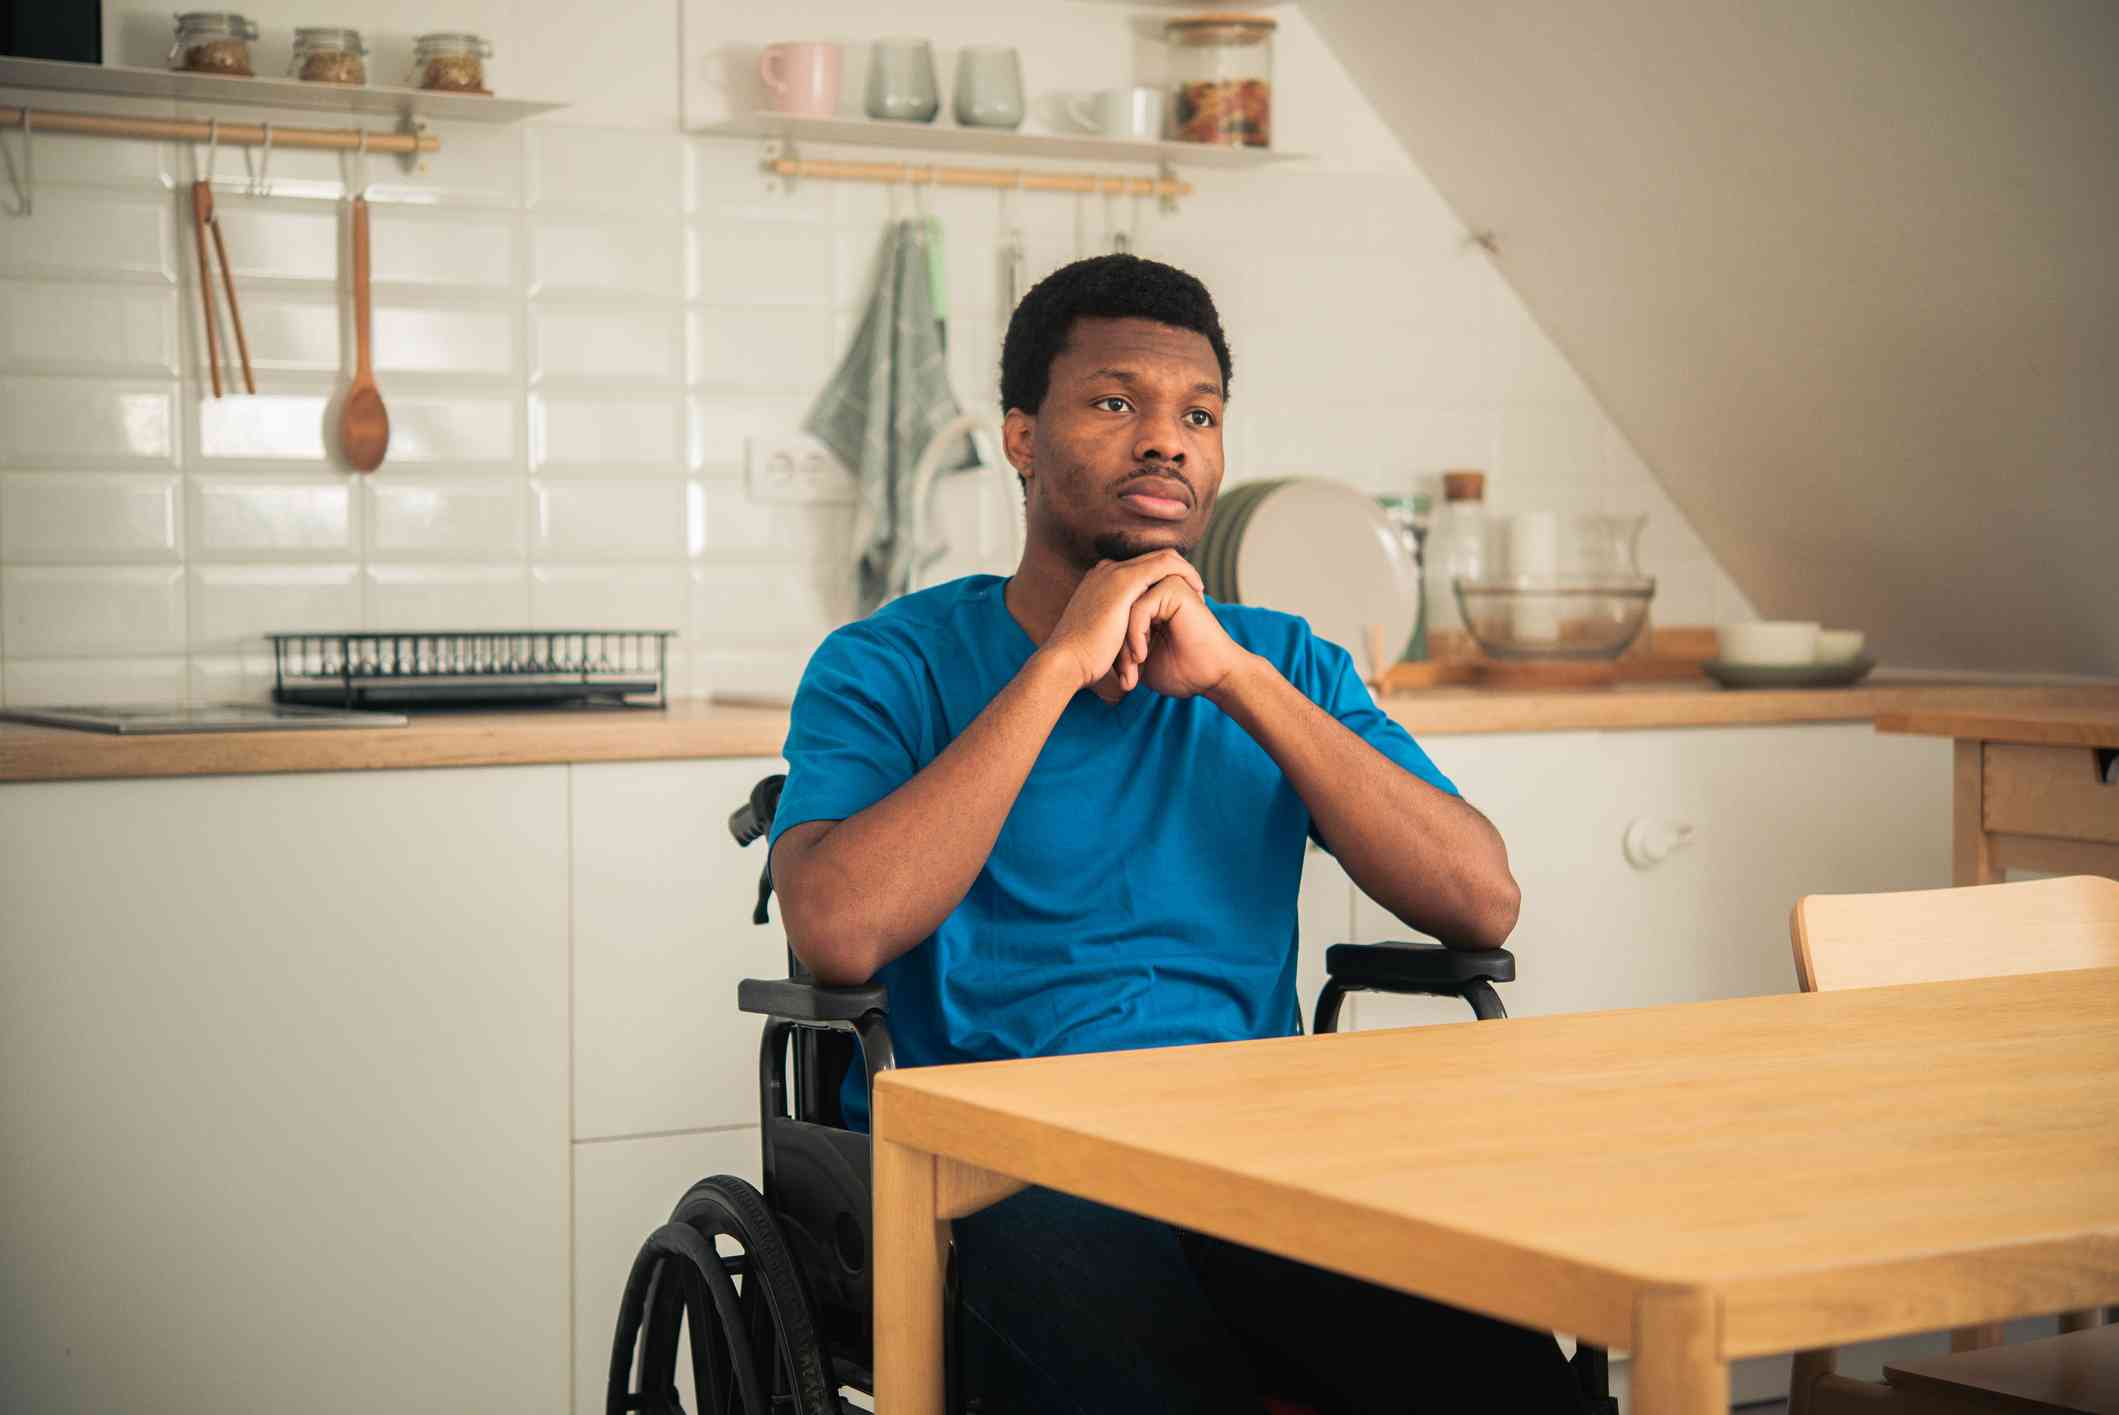  A man in a blue shirt sits in a wheelchair at the table in the kitchen with his hands clasped together under his chin as he gazes off deep in thought.